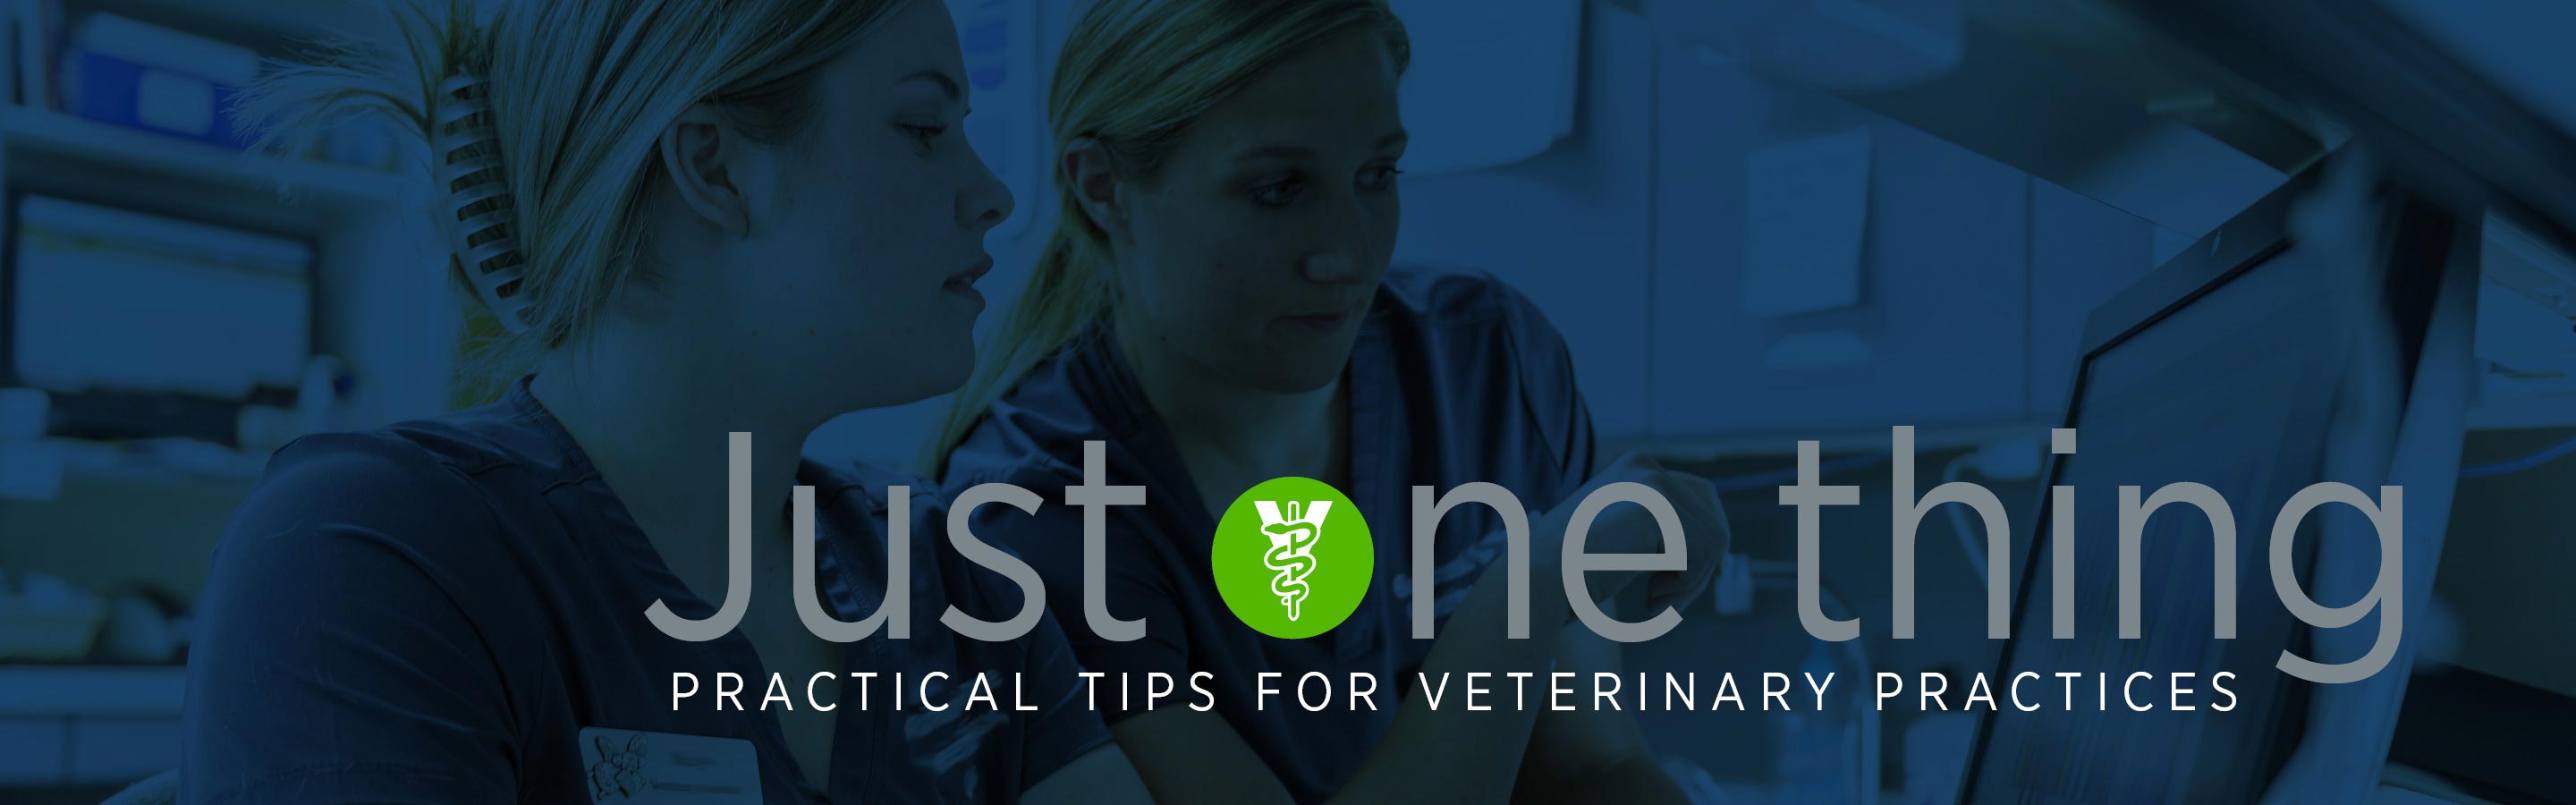 Just one thing: Practical tips for veterinary practices